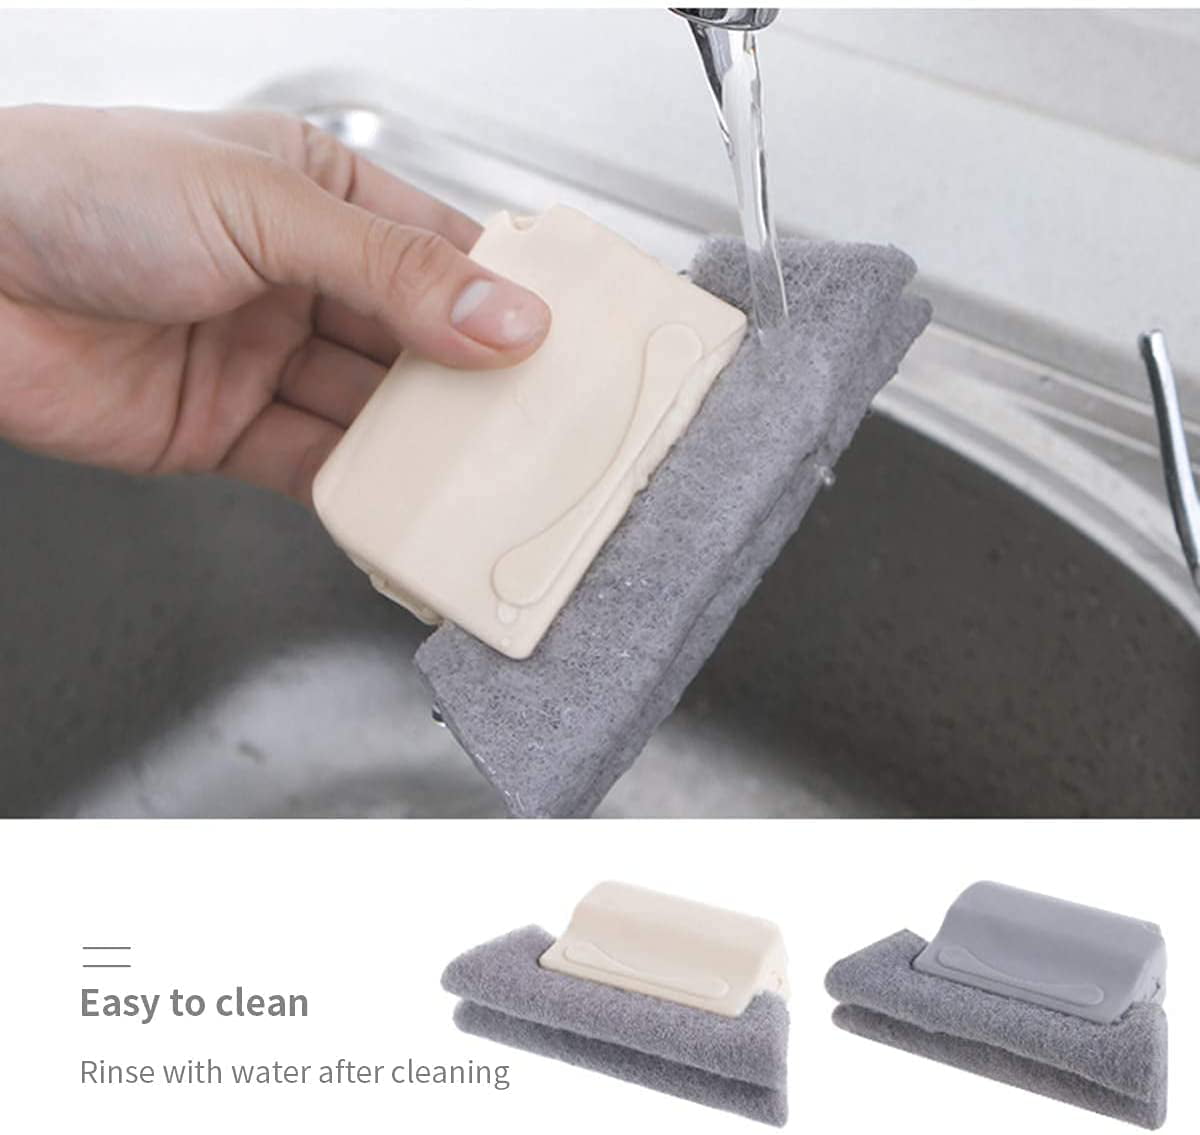 Hand-held Crevice Cleaner Tools Magic Window Groove Brush Fixed Brush Head Design Scouring Pad Material for Door Creative Groove Cleaning Brush Window Slides and Gaps beige